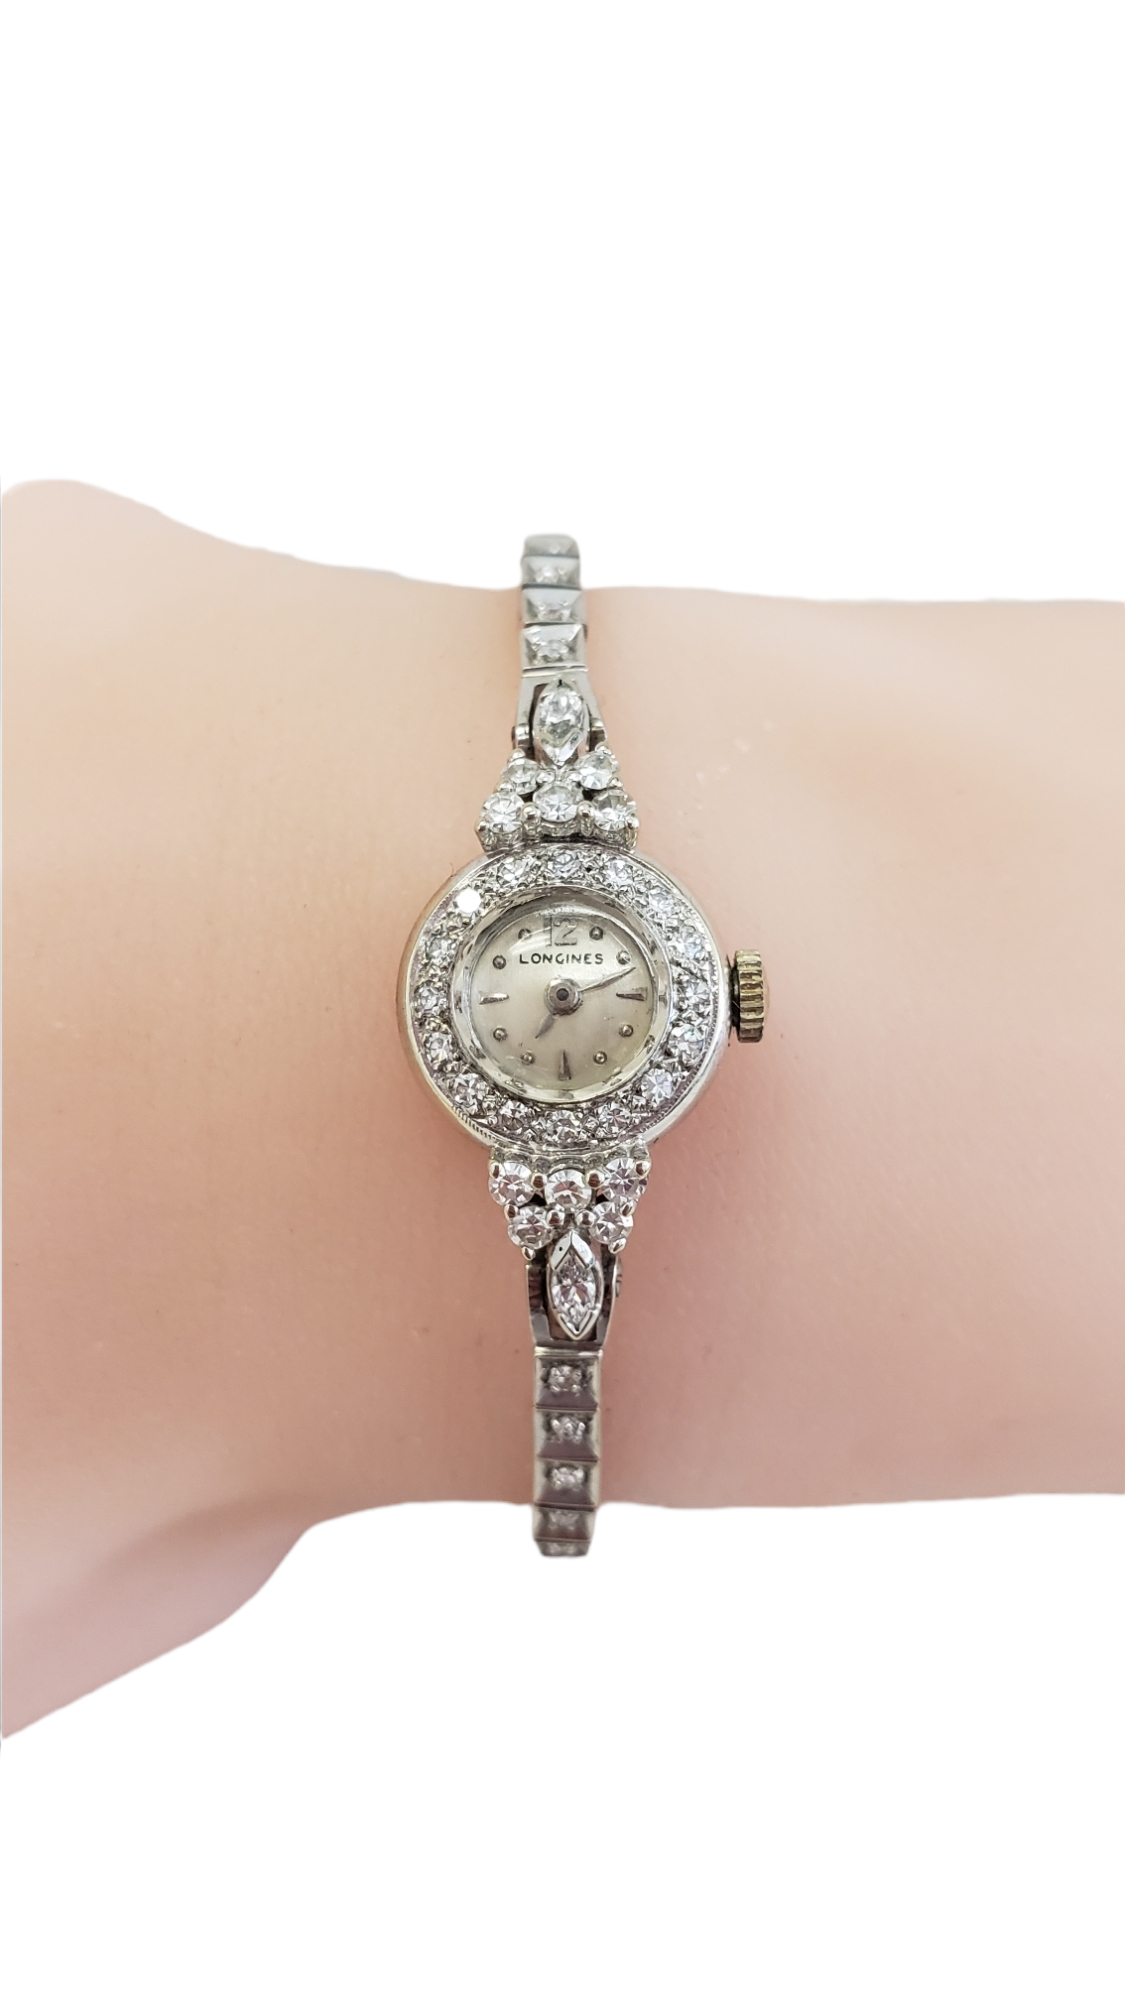 Vintage Longines 14K White Gold and Diamonds Women's Watch Preowned